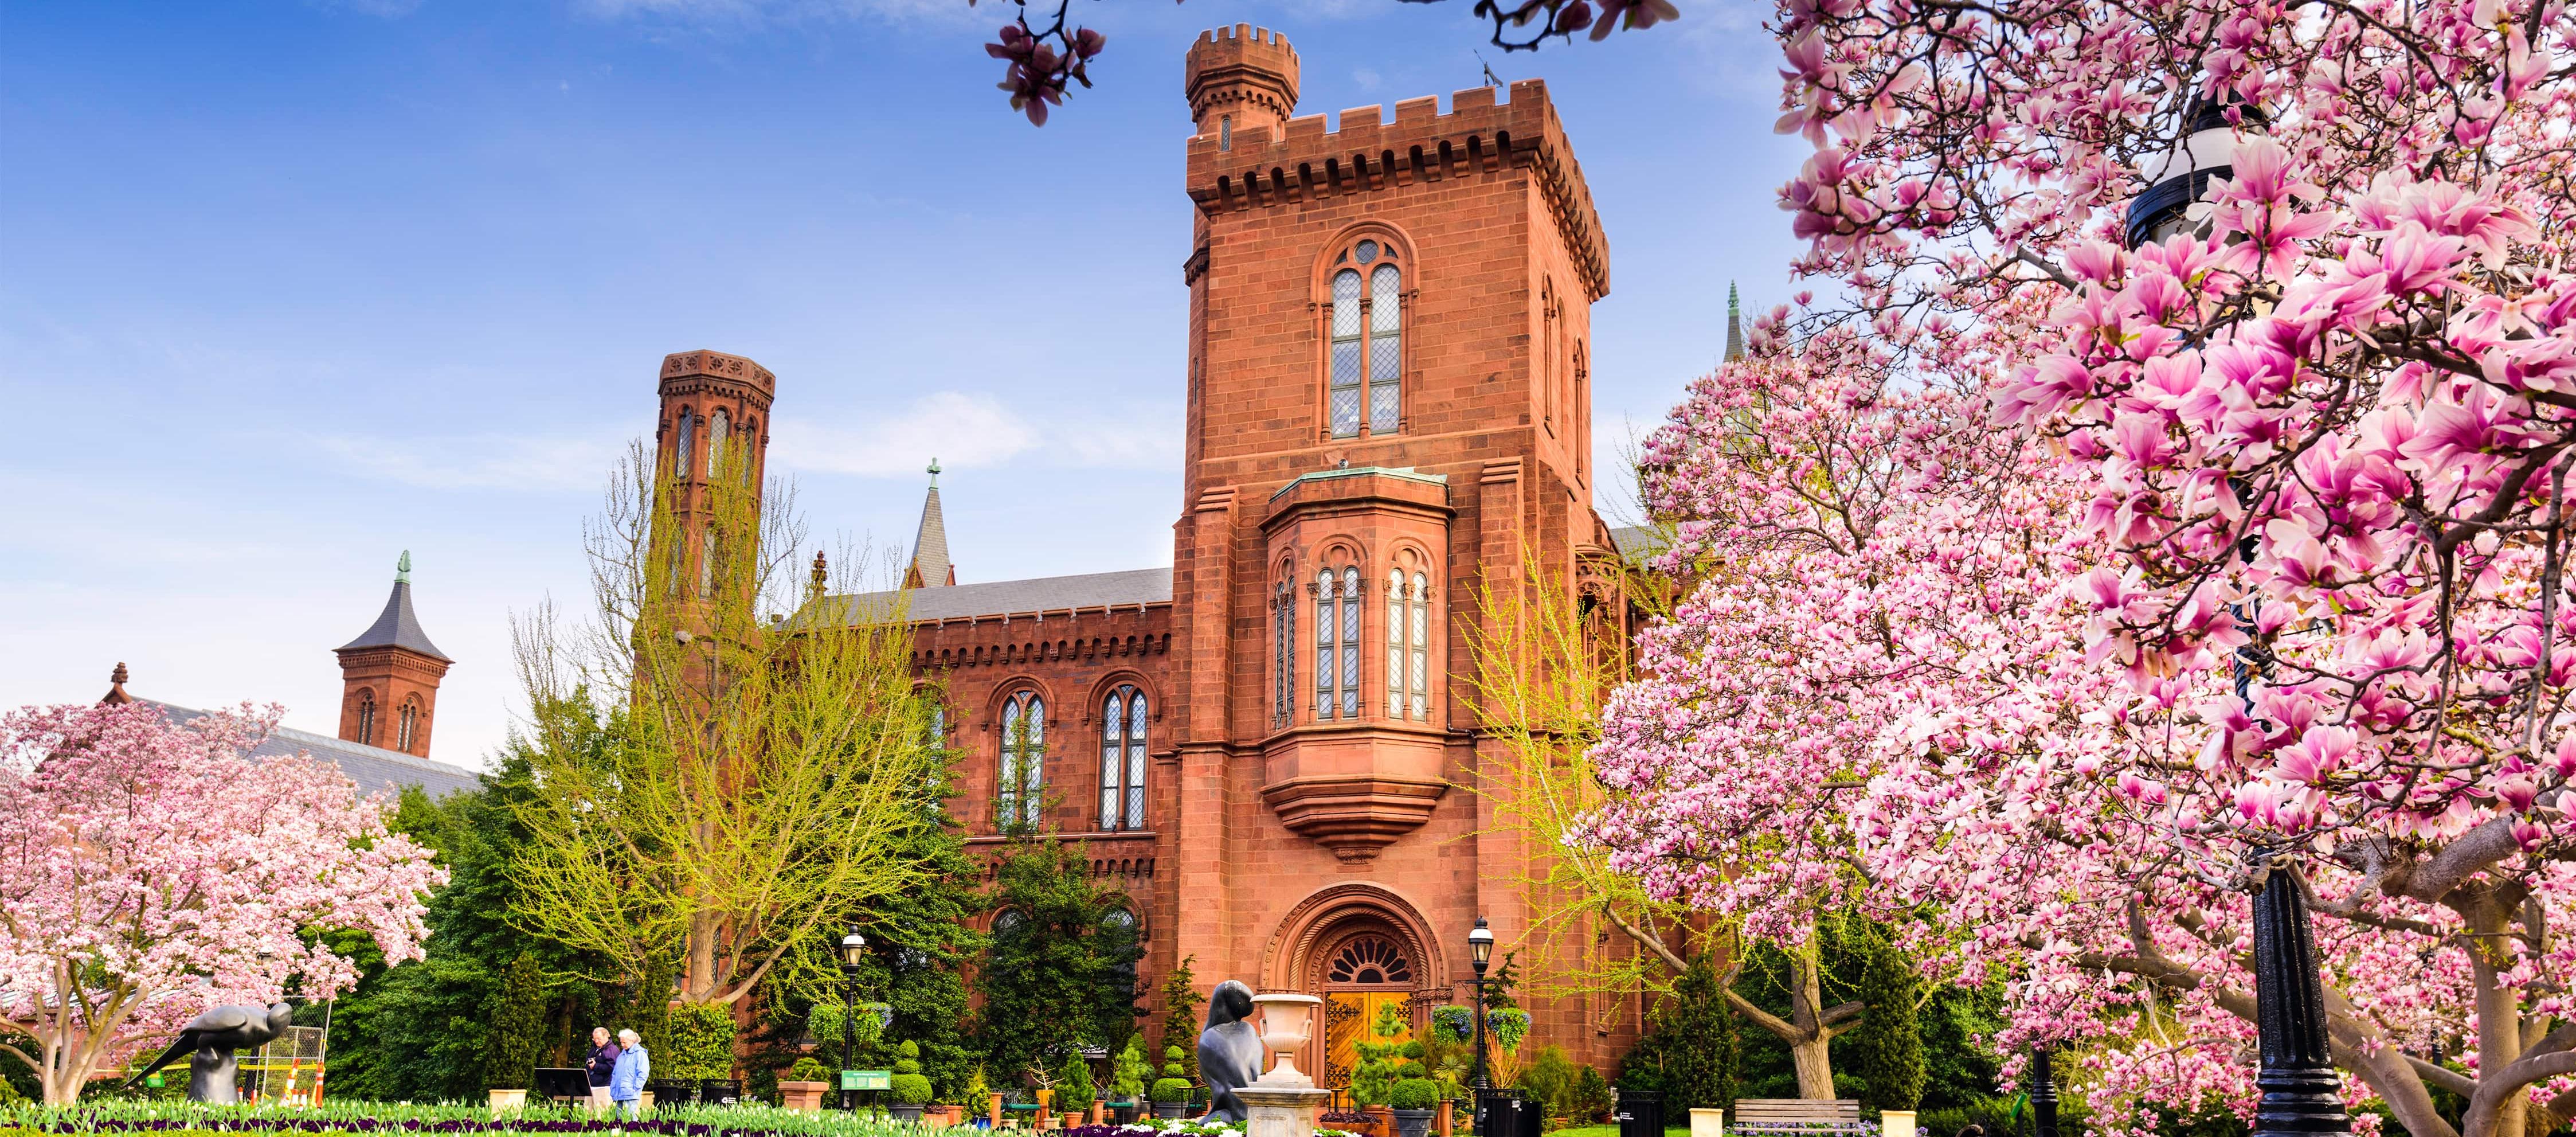 Smithsonian castle garden, red stone building with brick path. pink flowery trees